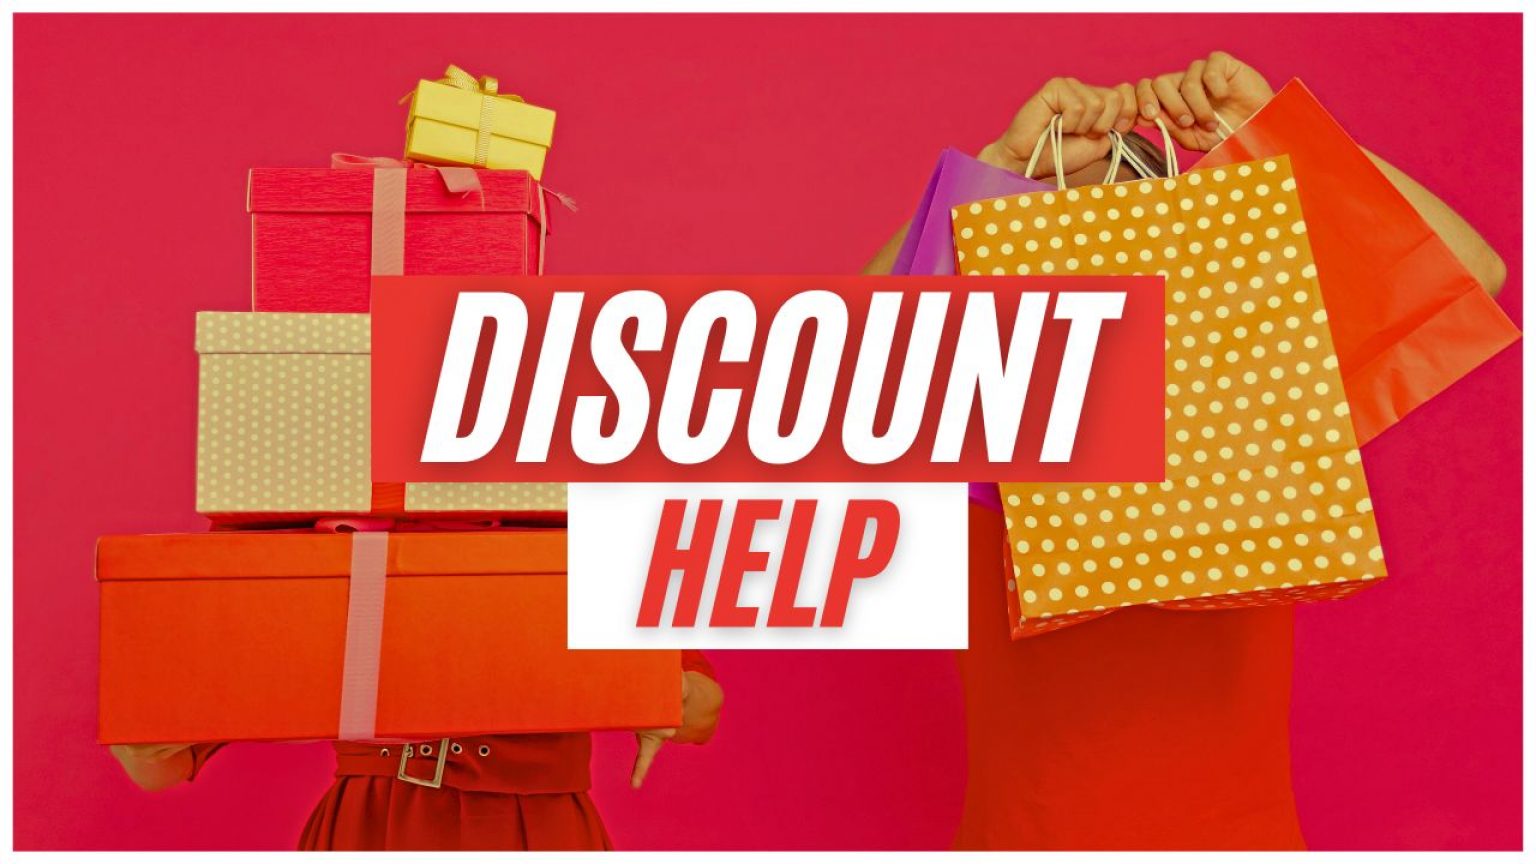 1. Smyths Toys - NHS Discount Offers - wide 8